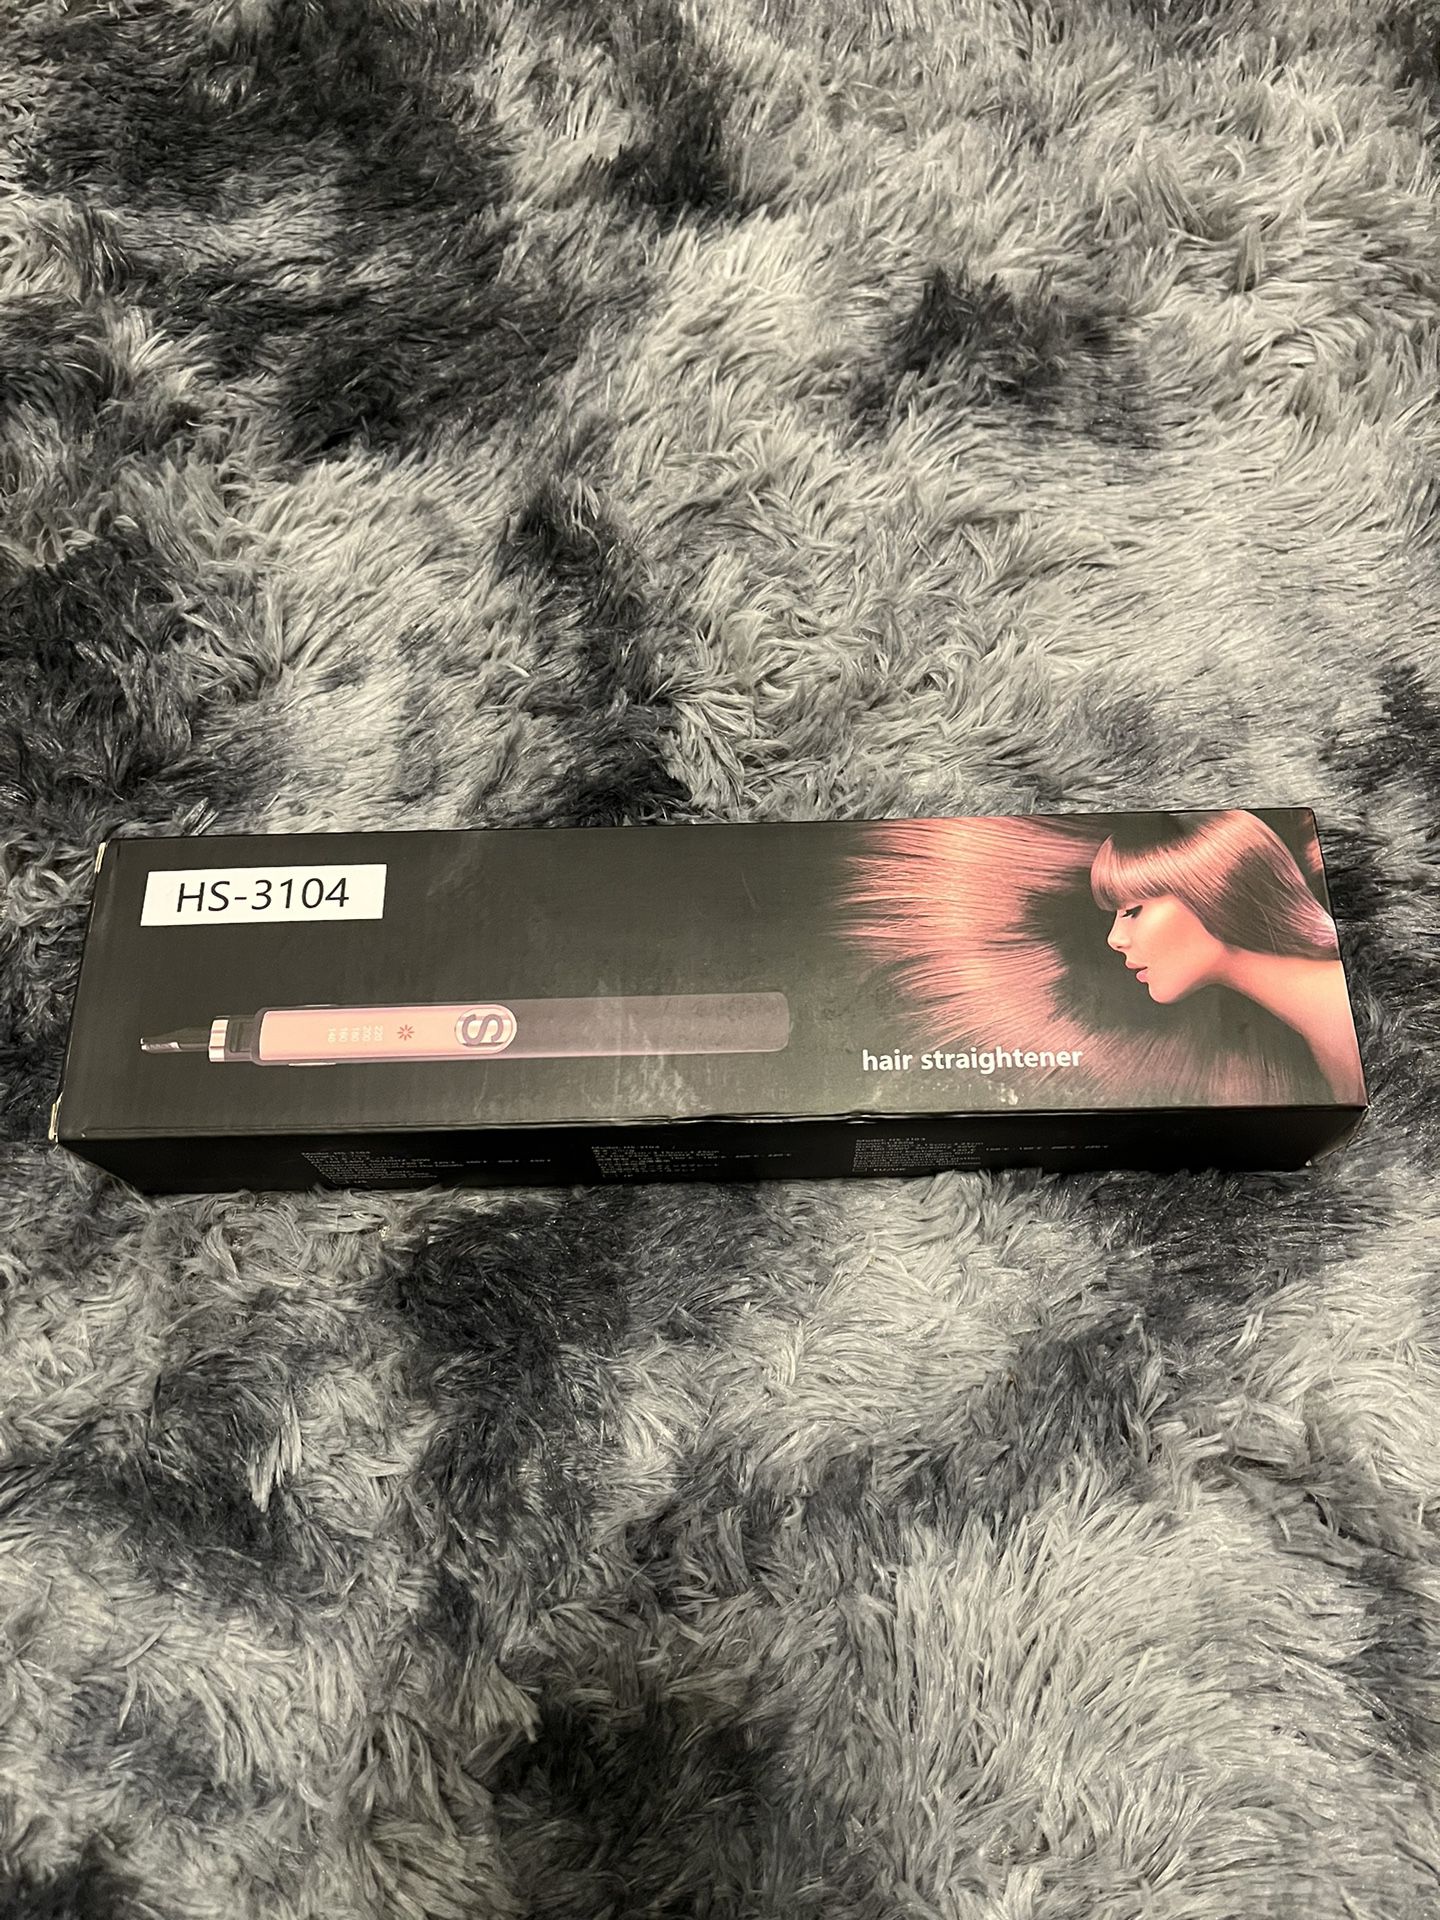 New/Unused Hair Straightener (FREE WITH PURCHASE OF ONE OF MY LISTINGS)